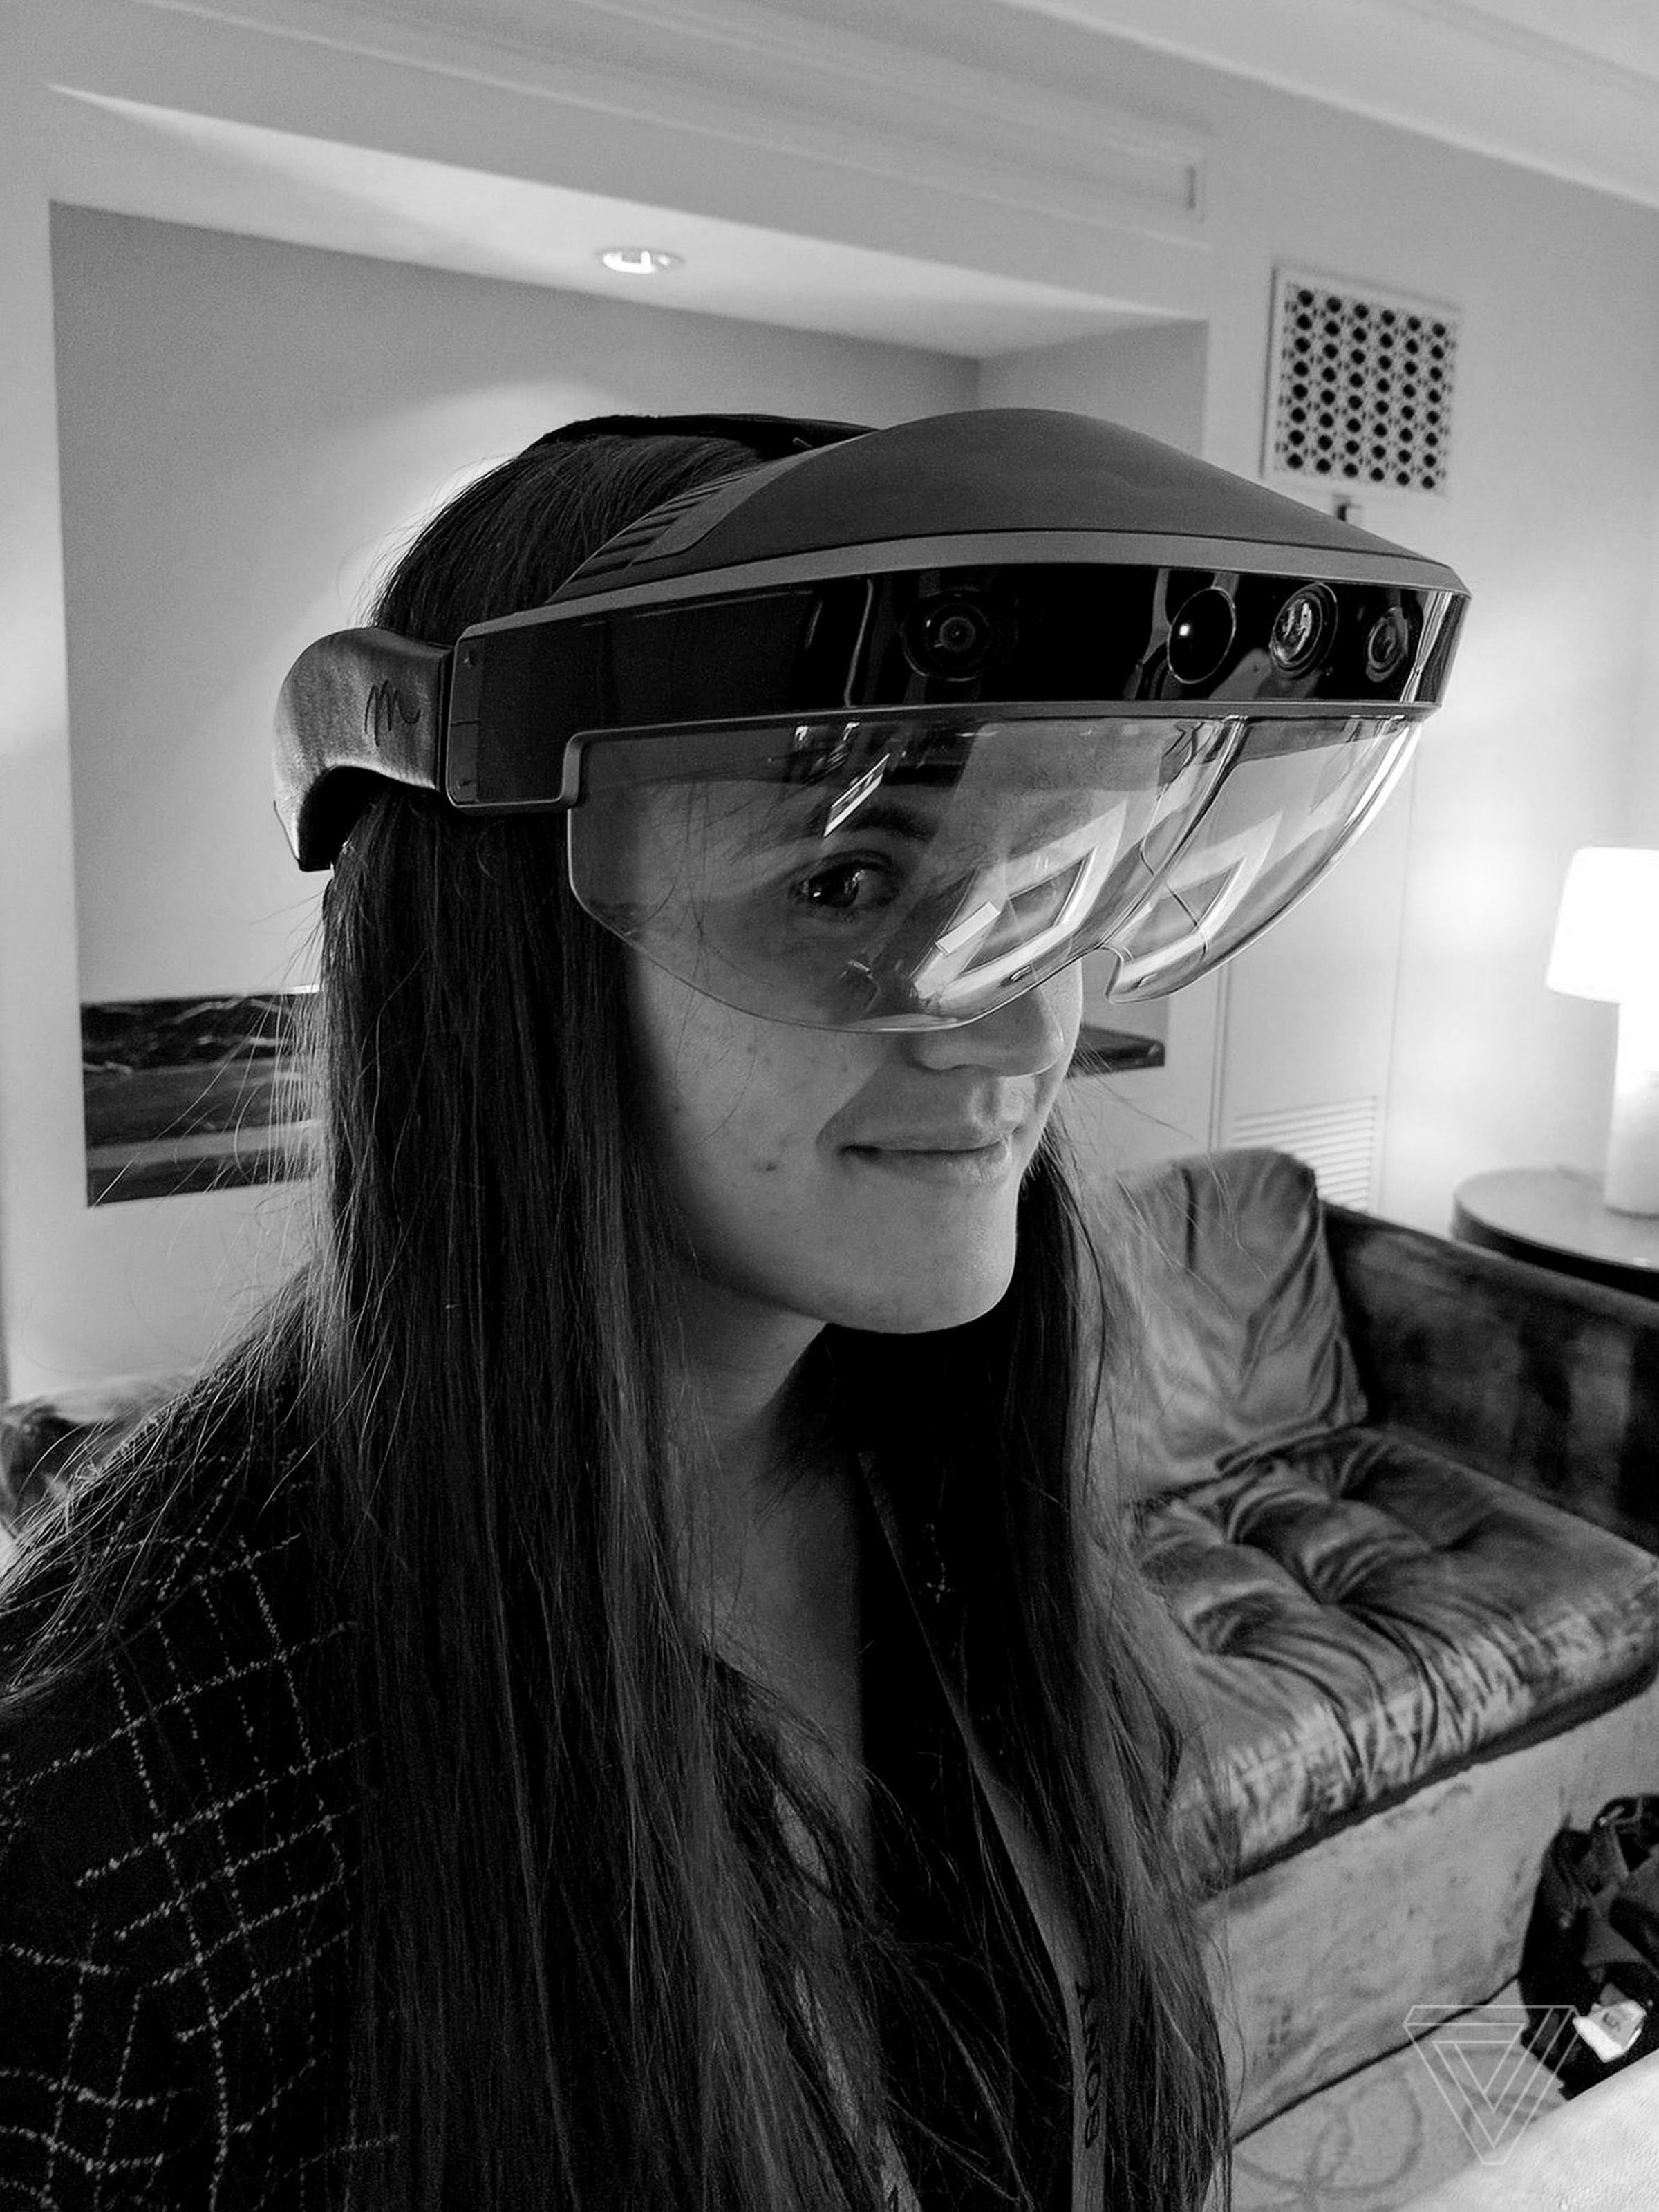 Adi Robertson remains skeptical that this IS a VR headset